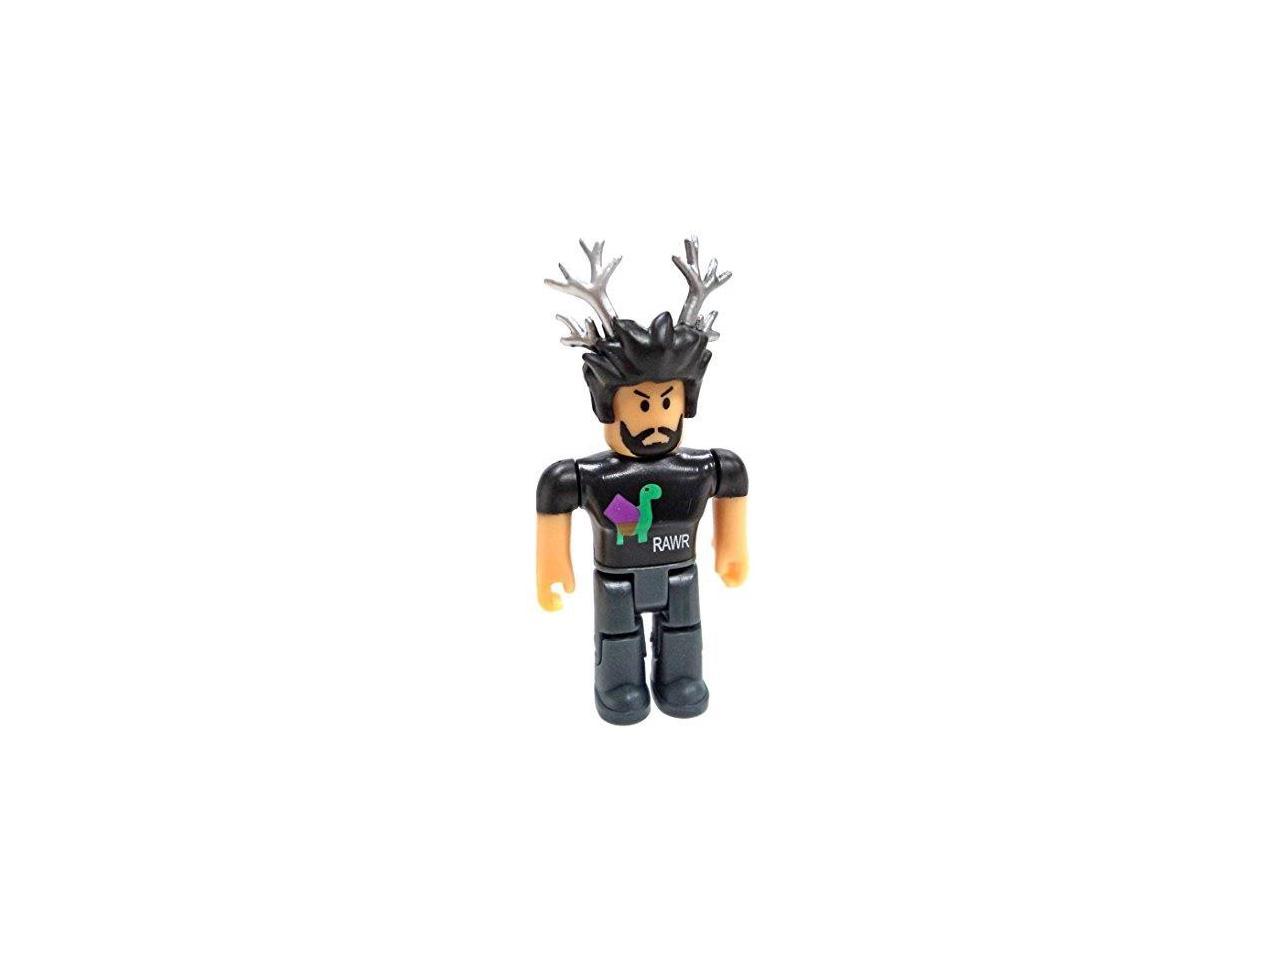 Roblox Series 2 Defaultio Action Figure Mystery Box Virtual Item Code 2 5 Newegg Com - details about new roblox toys defaultio series 2 box figures w virtual codes